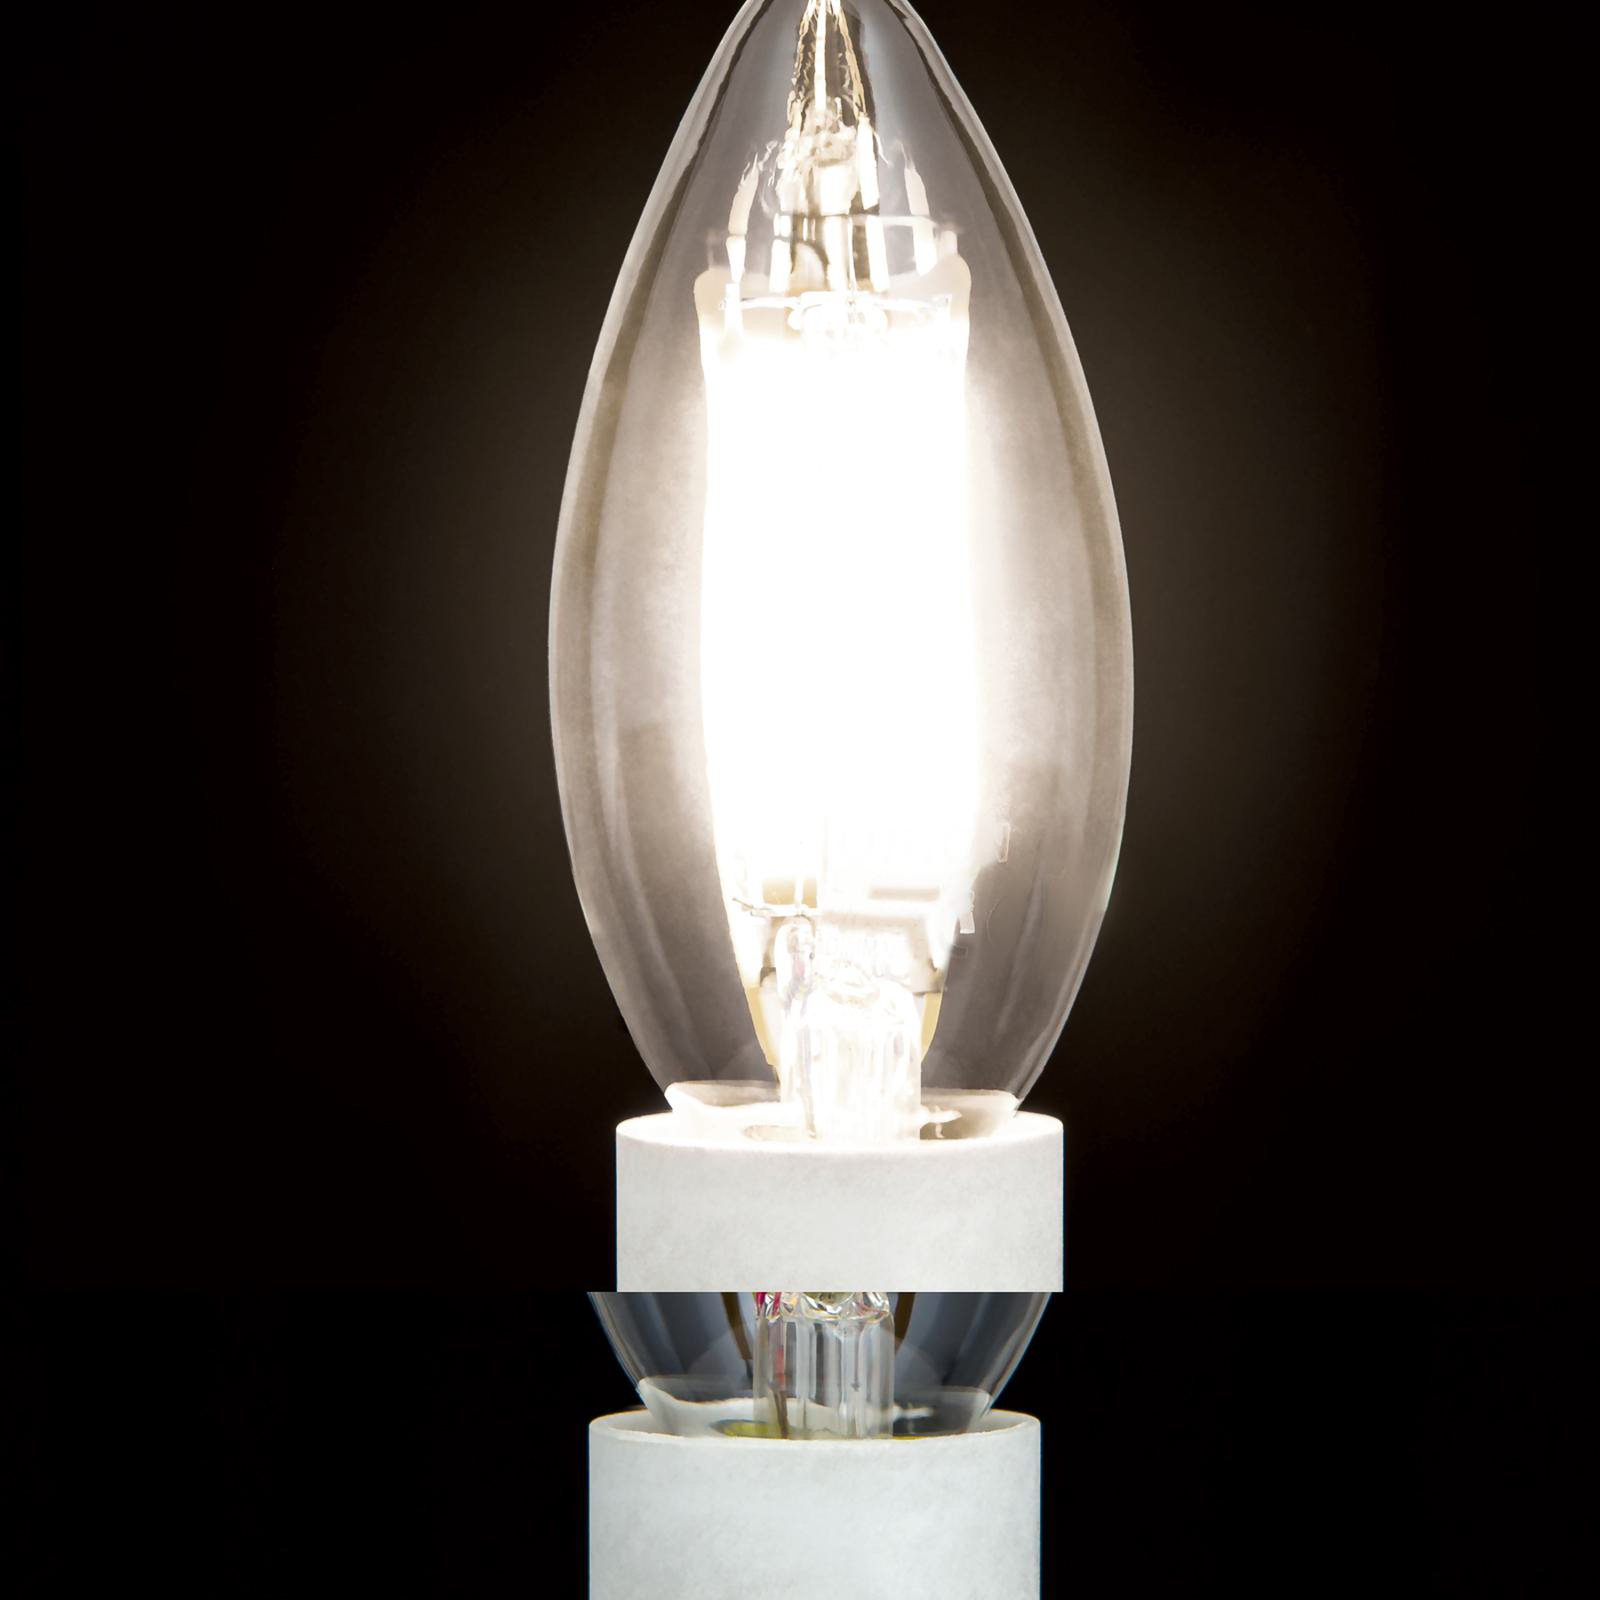 LED bulb Filament E14 C35 clear 6W 827 720lm dimmable